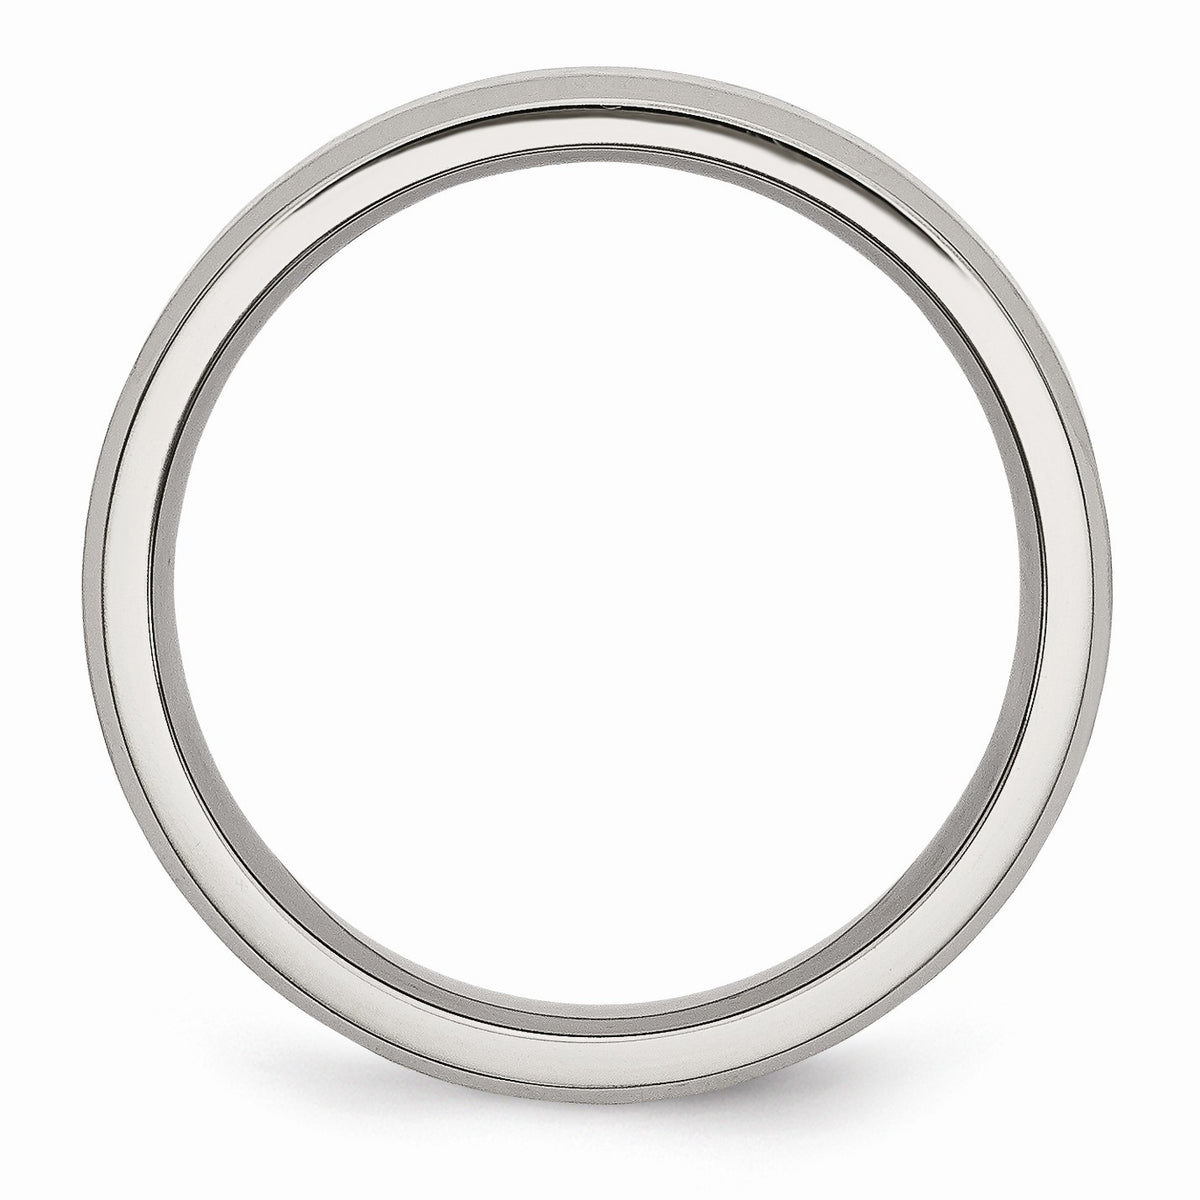 Alternate view of the Stainless Steel Flat Beveled Edge 6mm Comfort Fit Band by The Black Bow Jewelry Co.